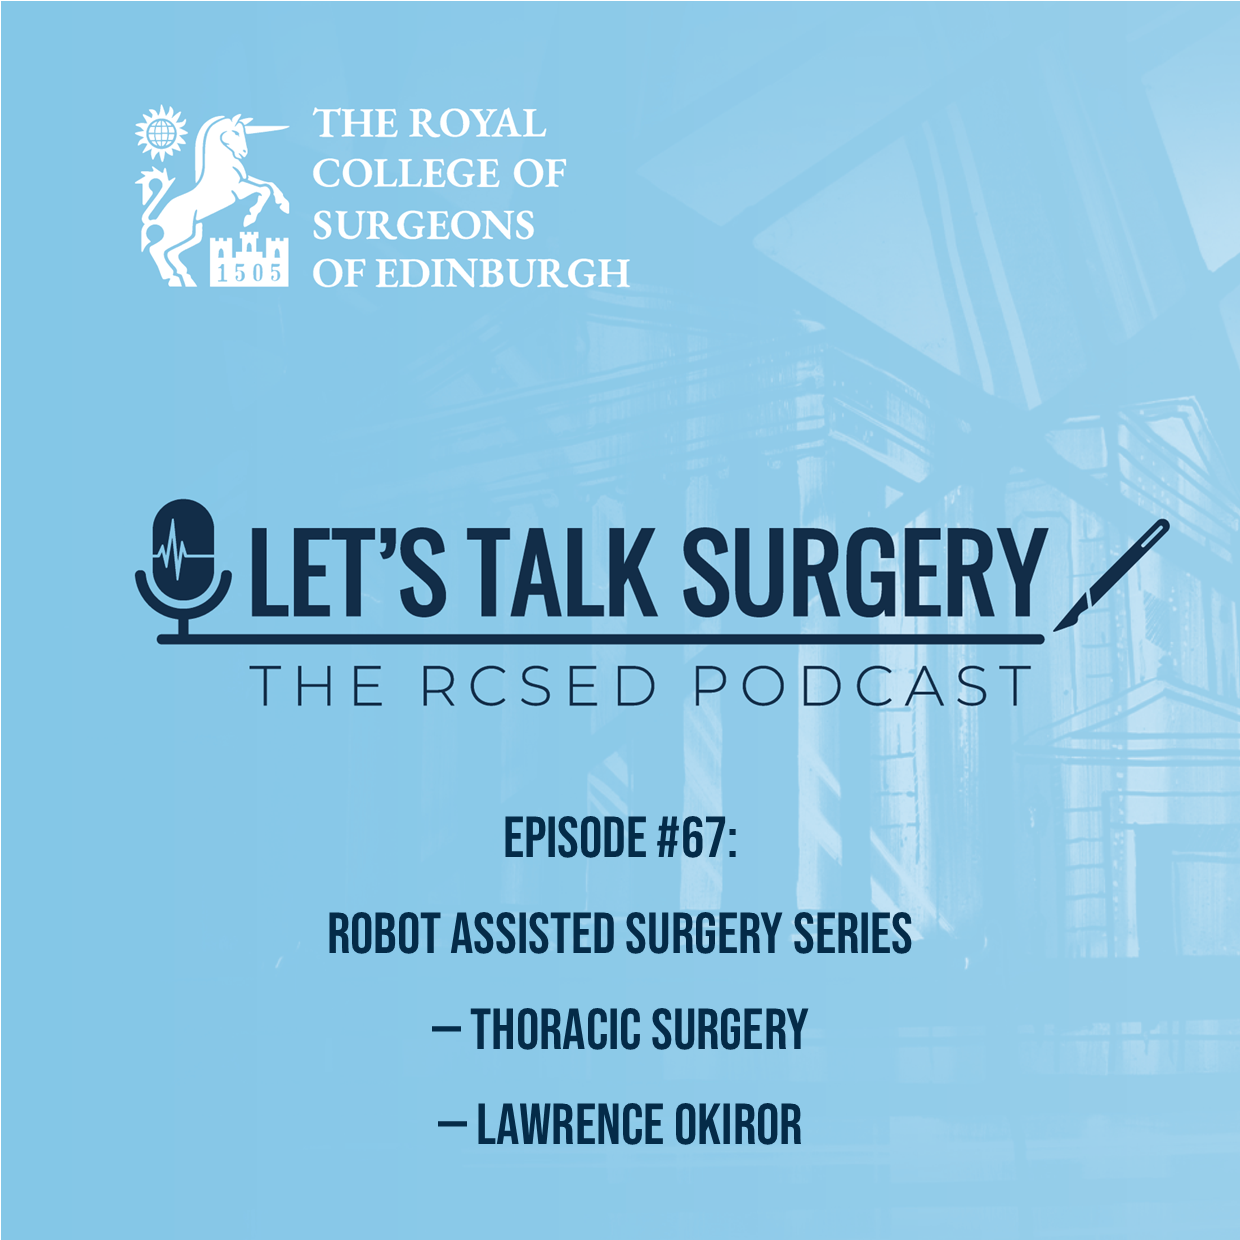 Robot Assisted Surgery Series – Thoracic Surgery – Lawrence Okiror